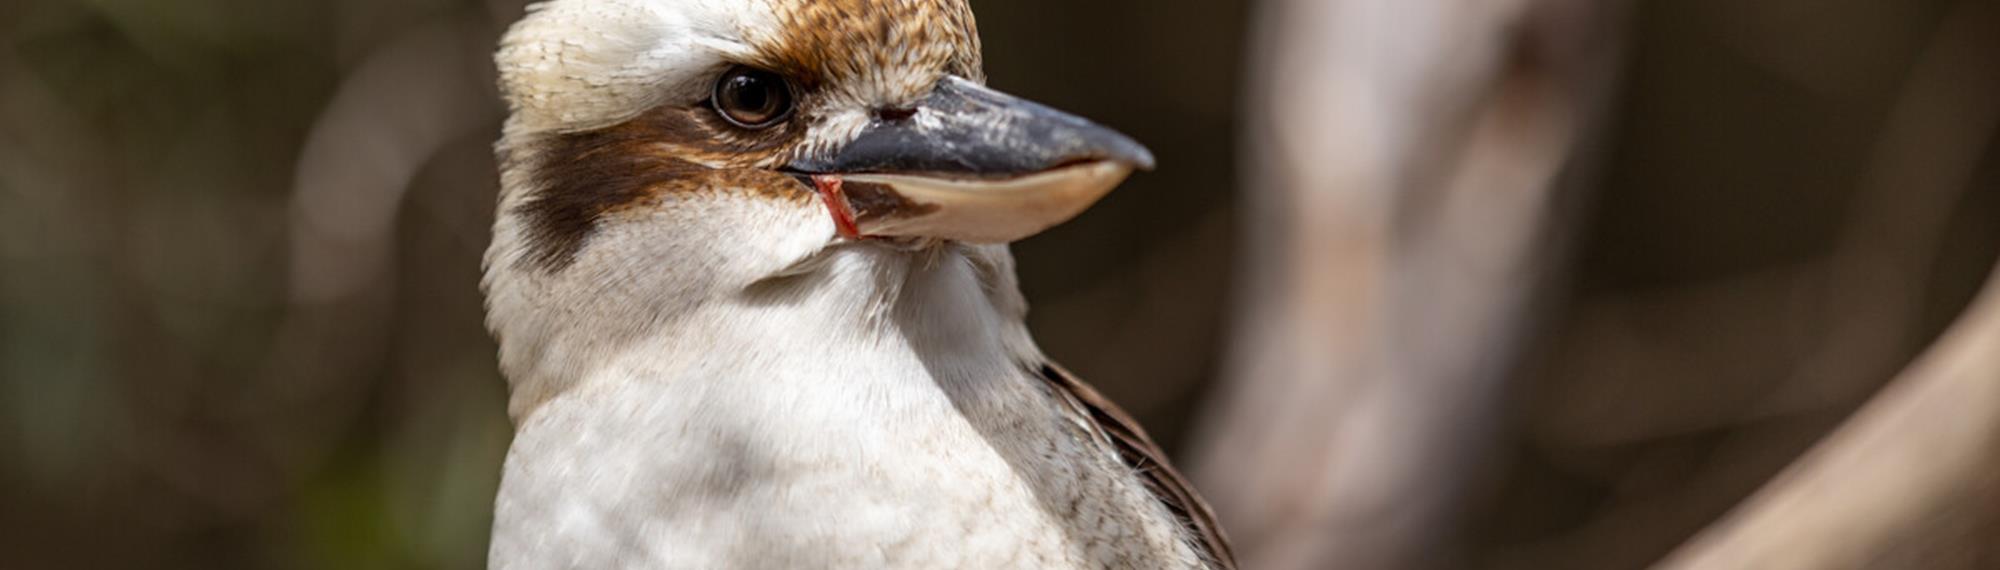 A Kookaburra with brown and white on their head looks to the right of the camera.